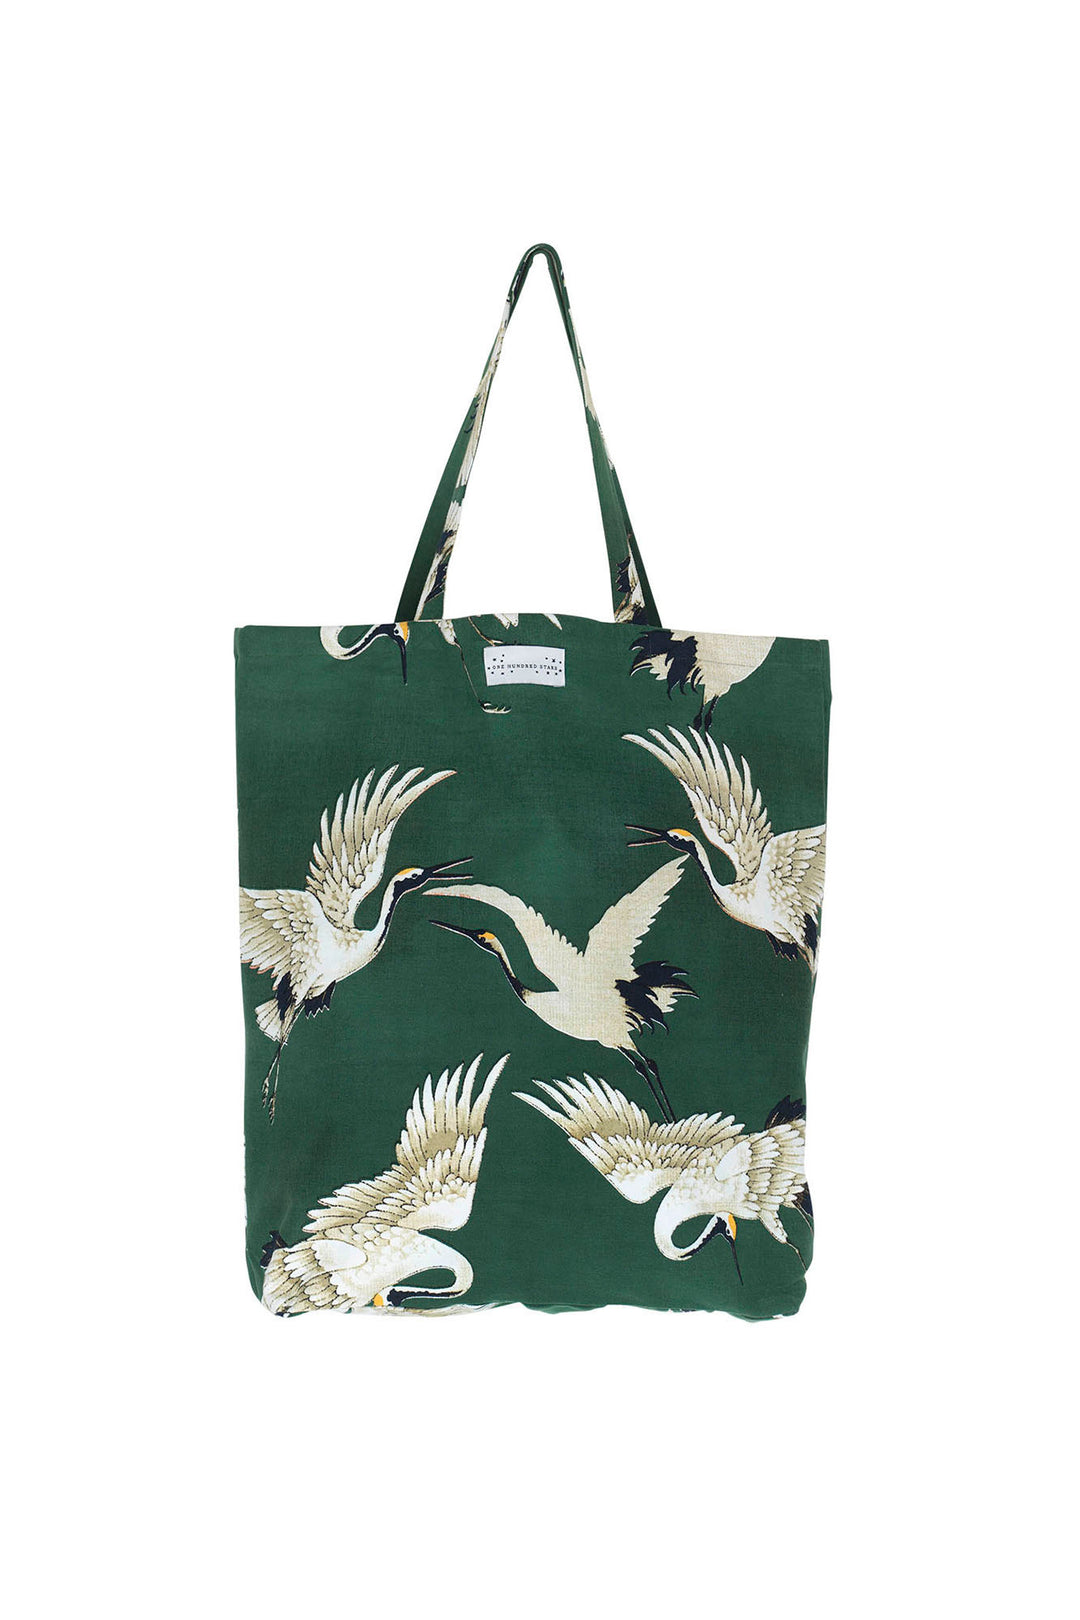 ladies canvas tote bag green background with stork bird print by One Hundred Stars